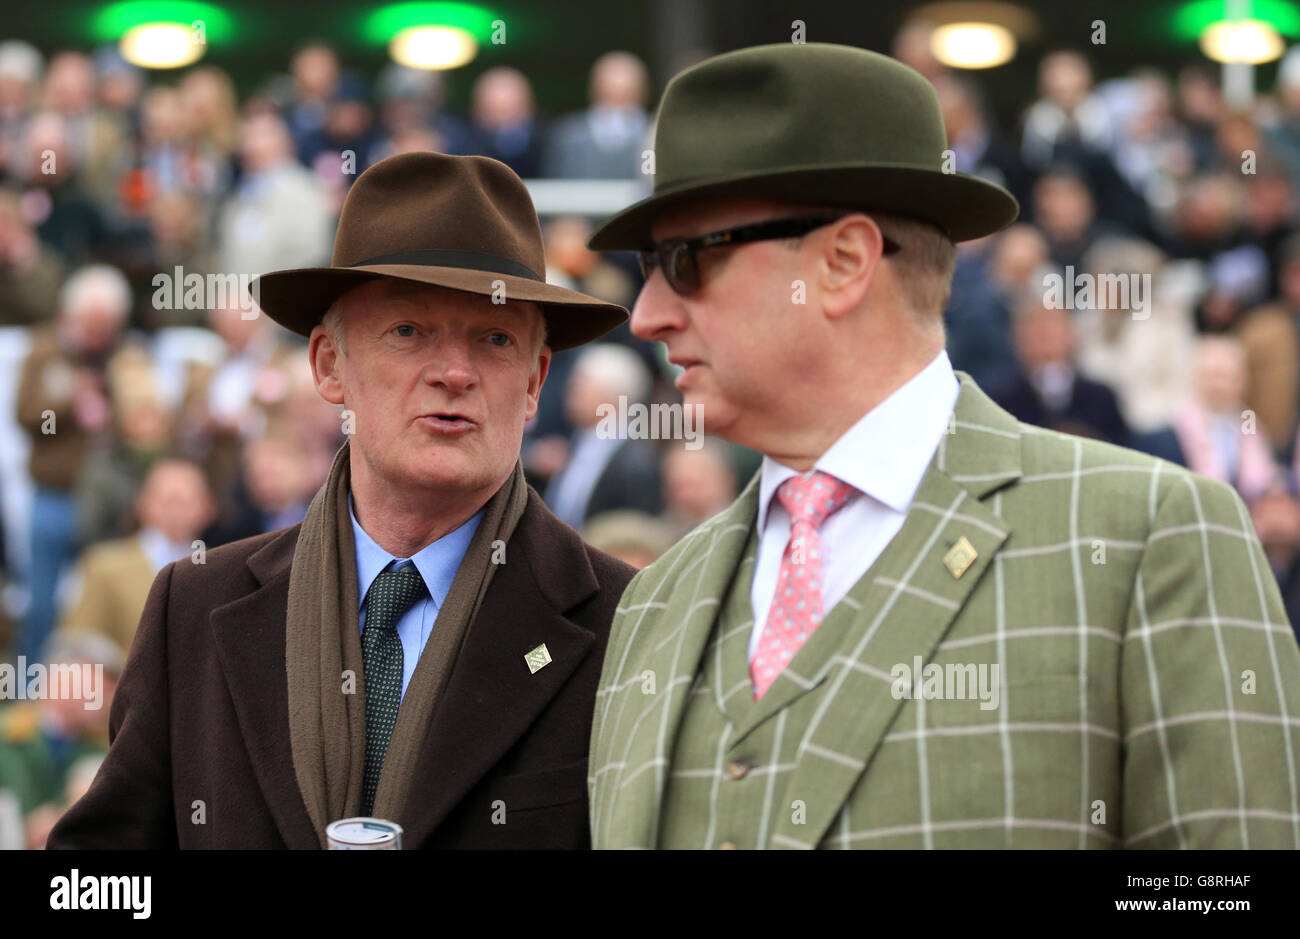 Trainer Willie Mullins (left) and owner Rich Ricci during Champion Day of the 2016 Cheltenham Festival at Cheltenham Racecourse. PRESS ASSOCIATION Photo. Picture date: Tuesday March 15, 2016. See PA story RACING Cheltenham. Photo credit should read: Mike Egerton/PA Wire. Stock Photo